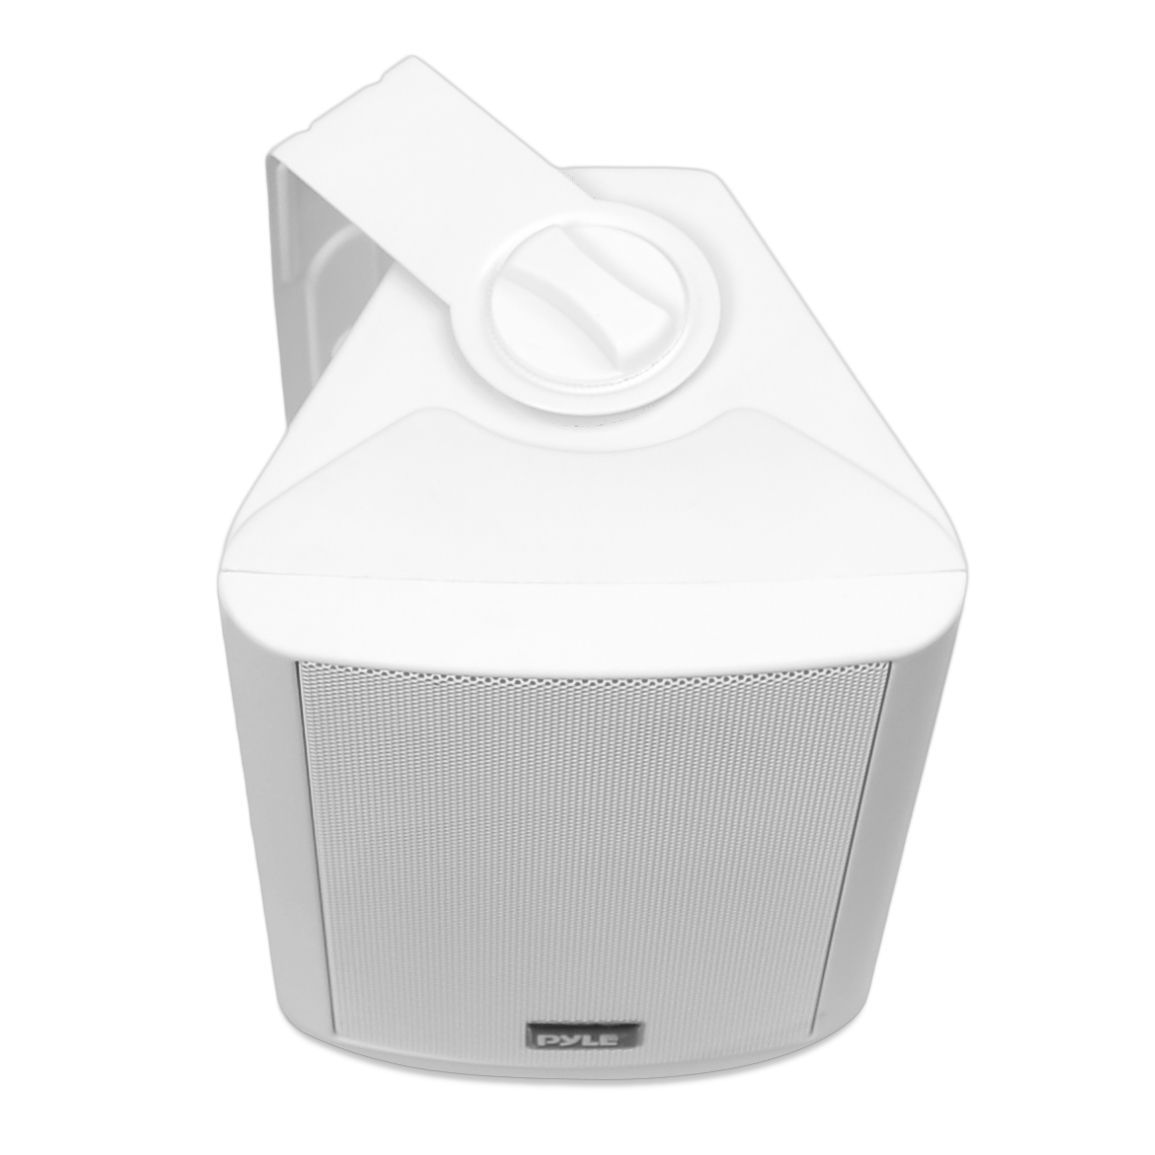 Pyle Pair of 5.25'' Home Bluetooth Speaker System, IP44 Waterproof - White (PDWR51BTWT)